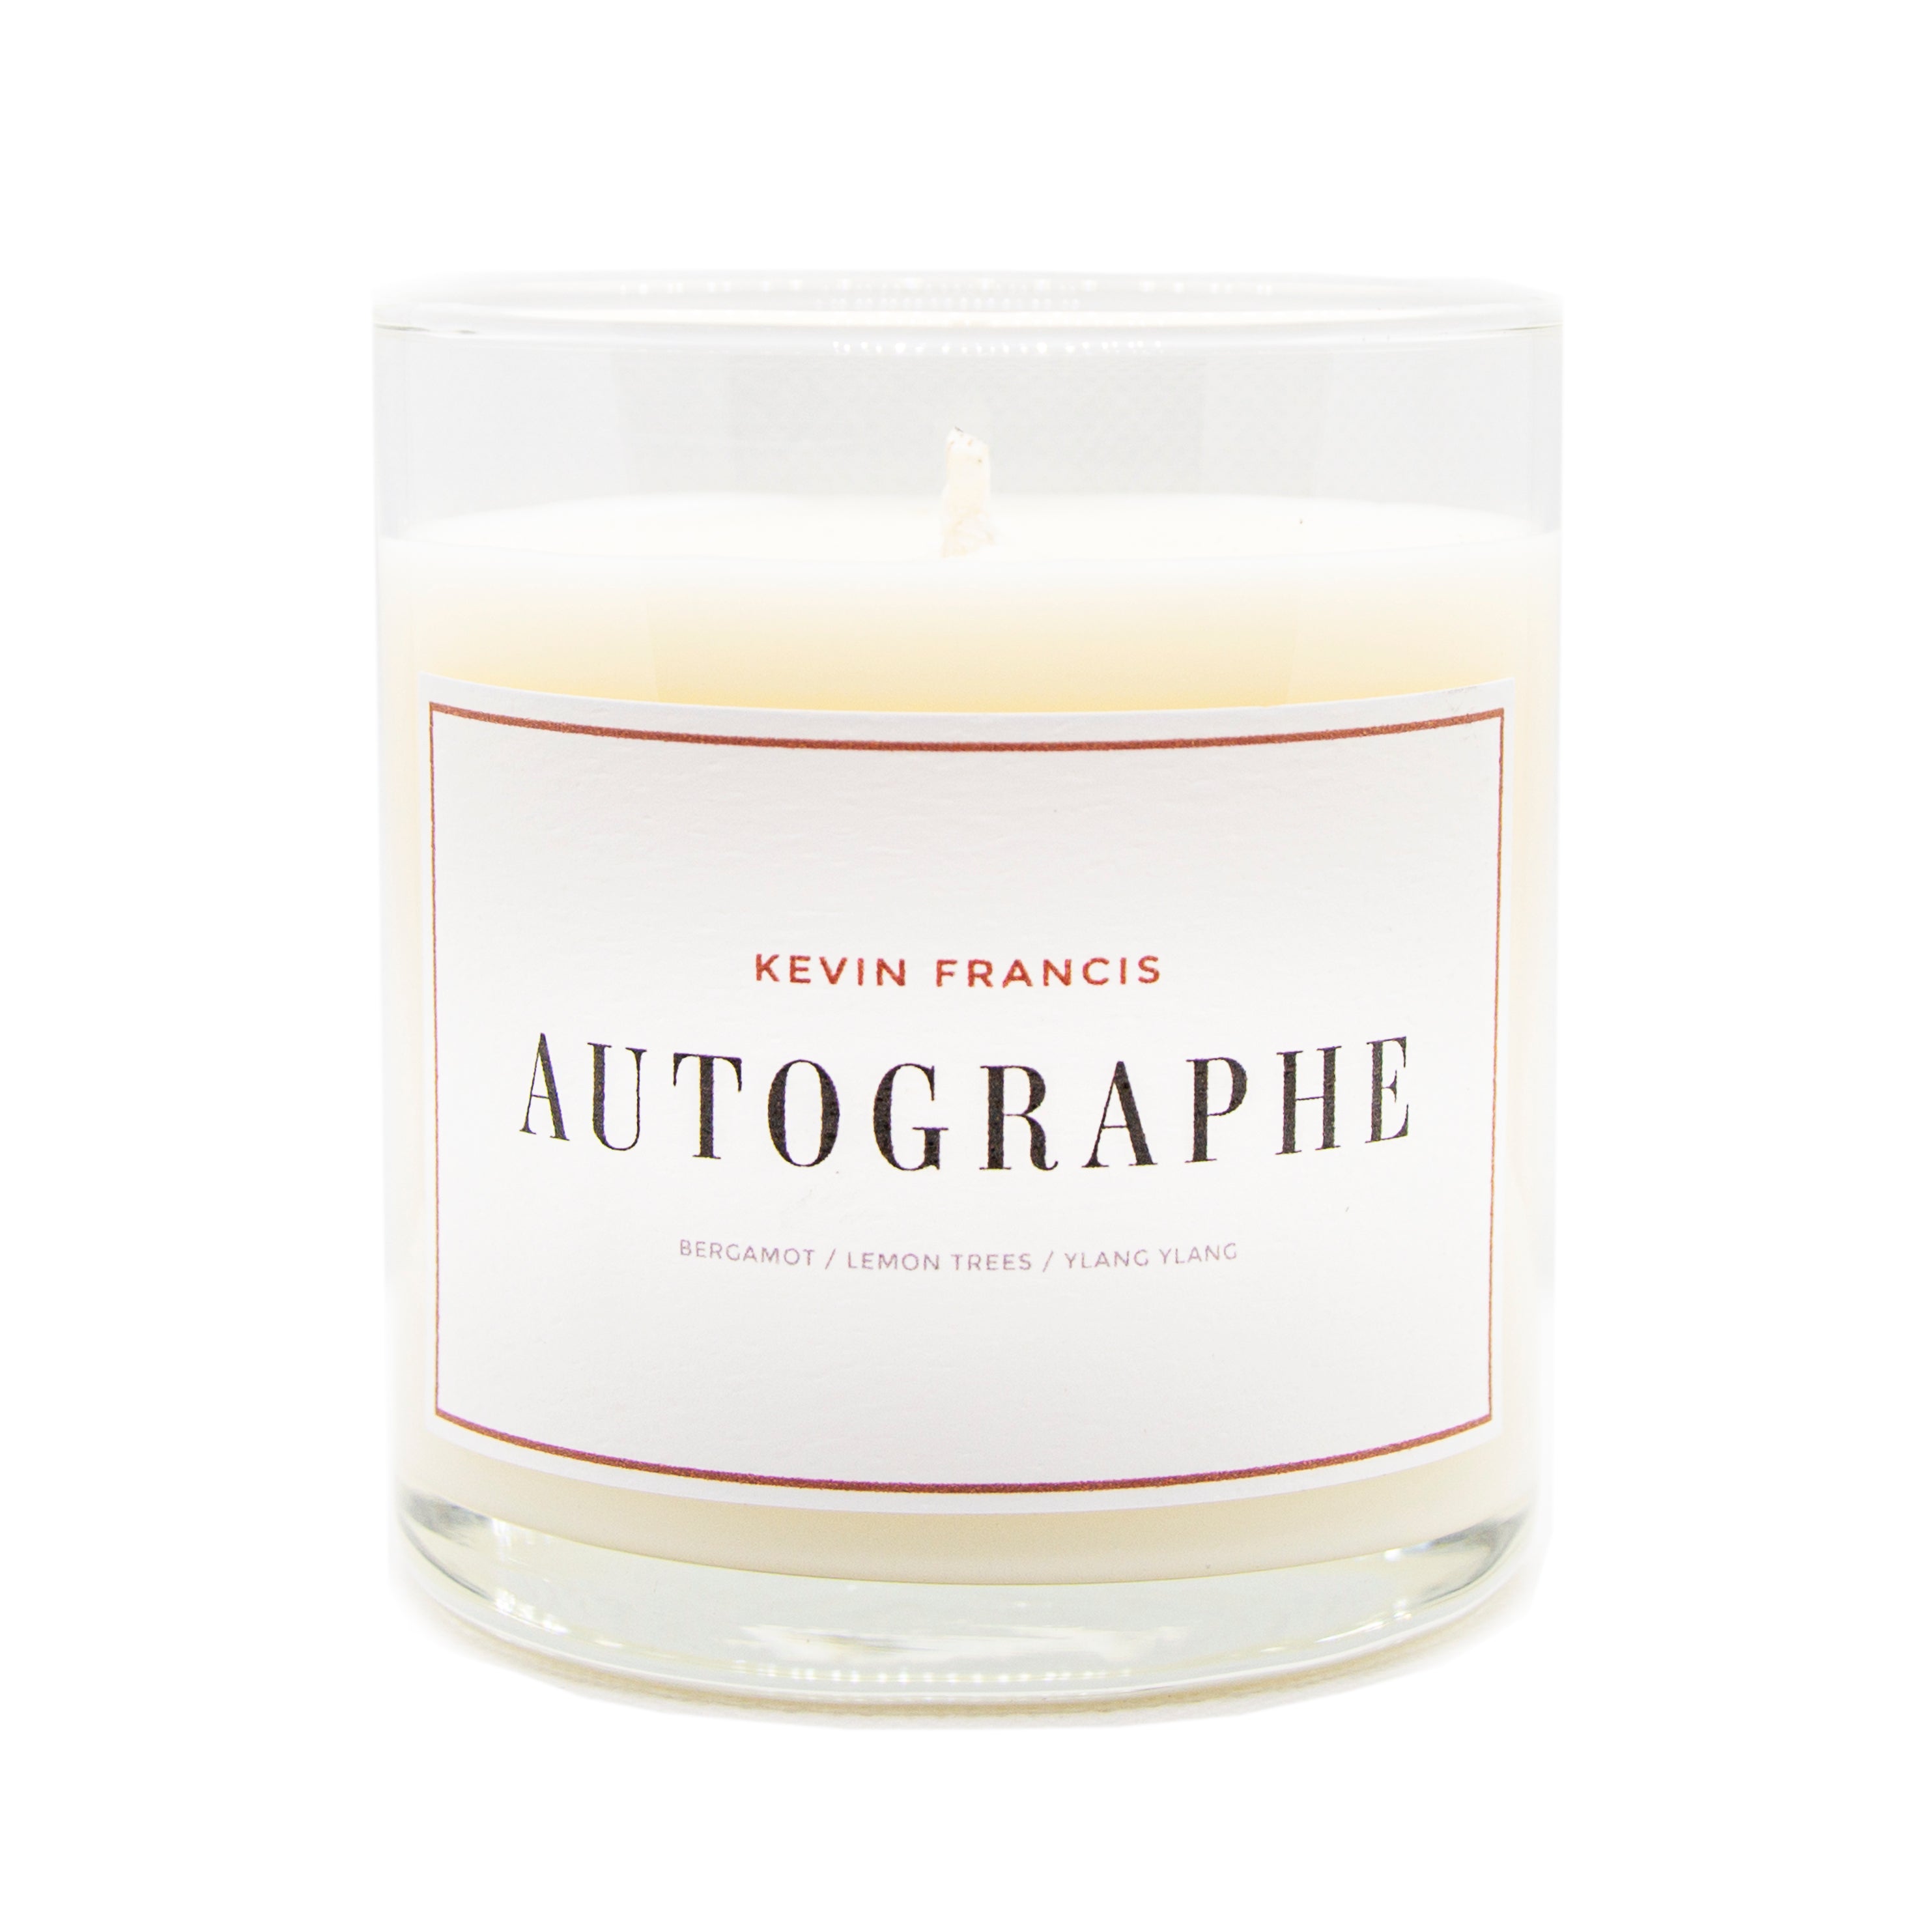 Autographe Luxury Scented Candle by Kevin Francis Design | Luxury Home Decor